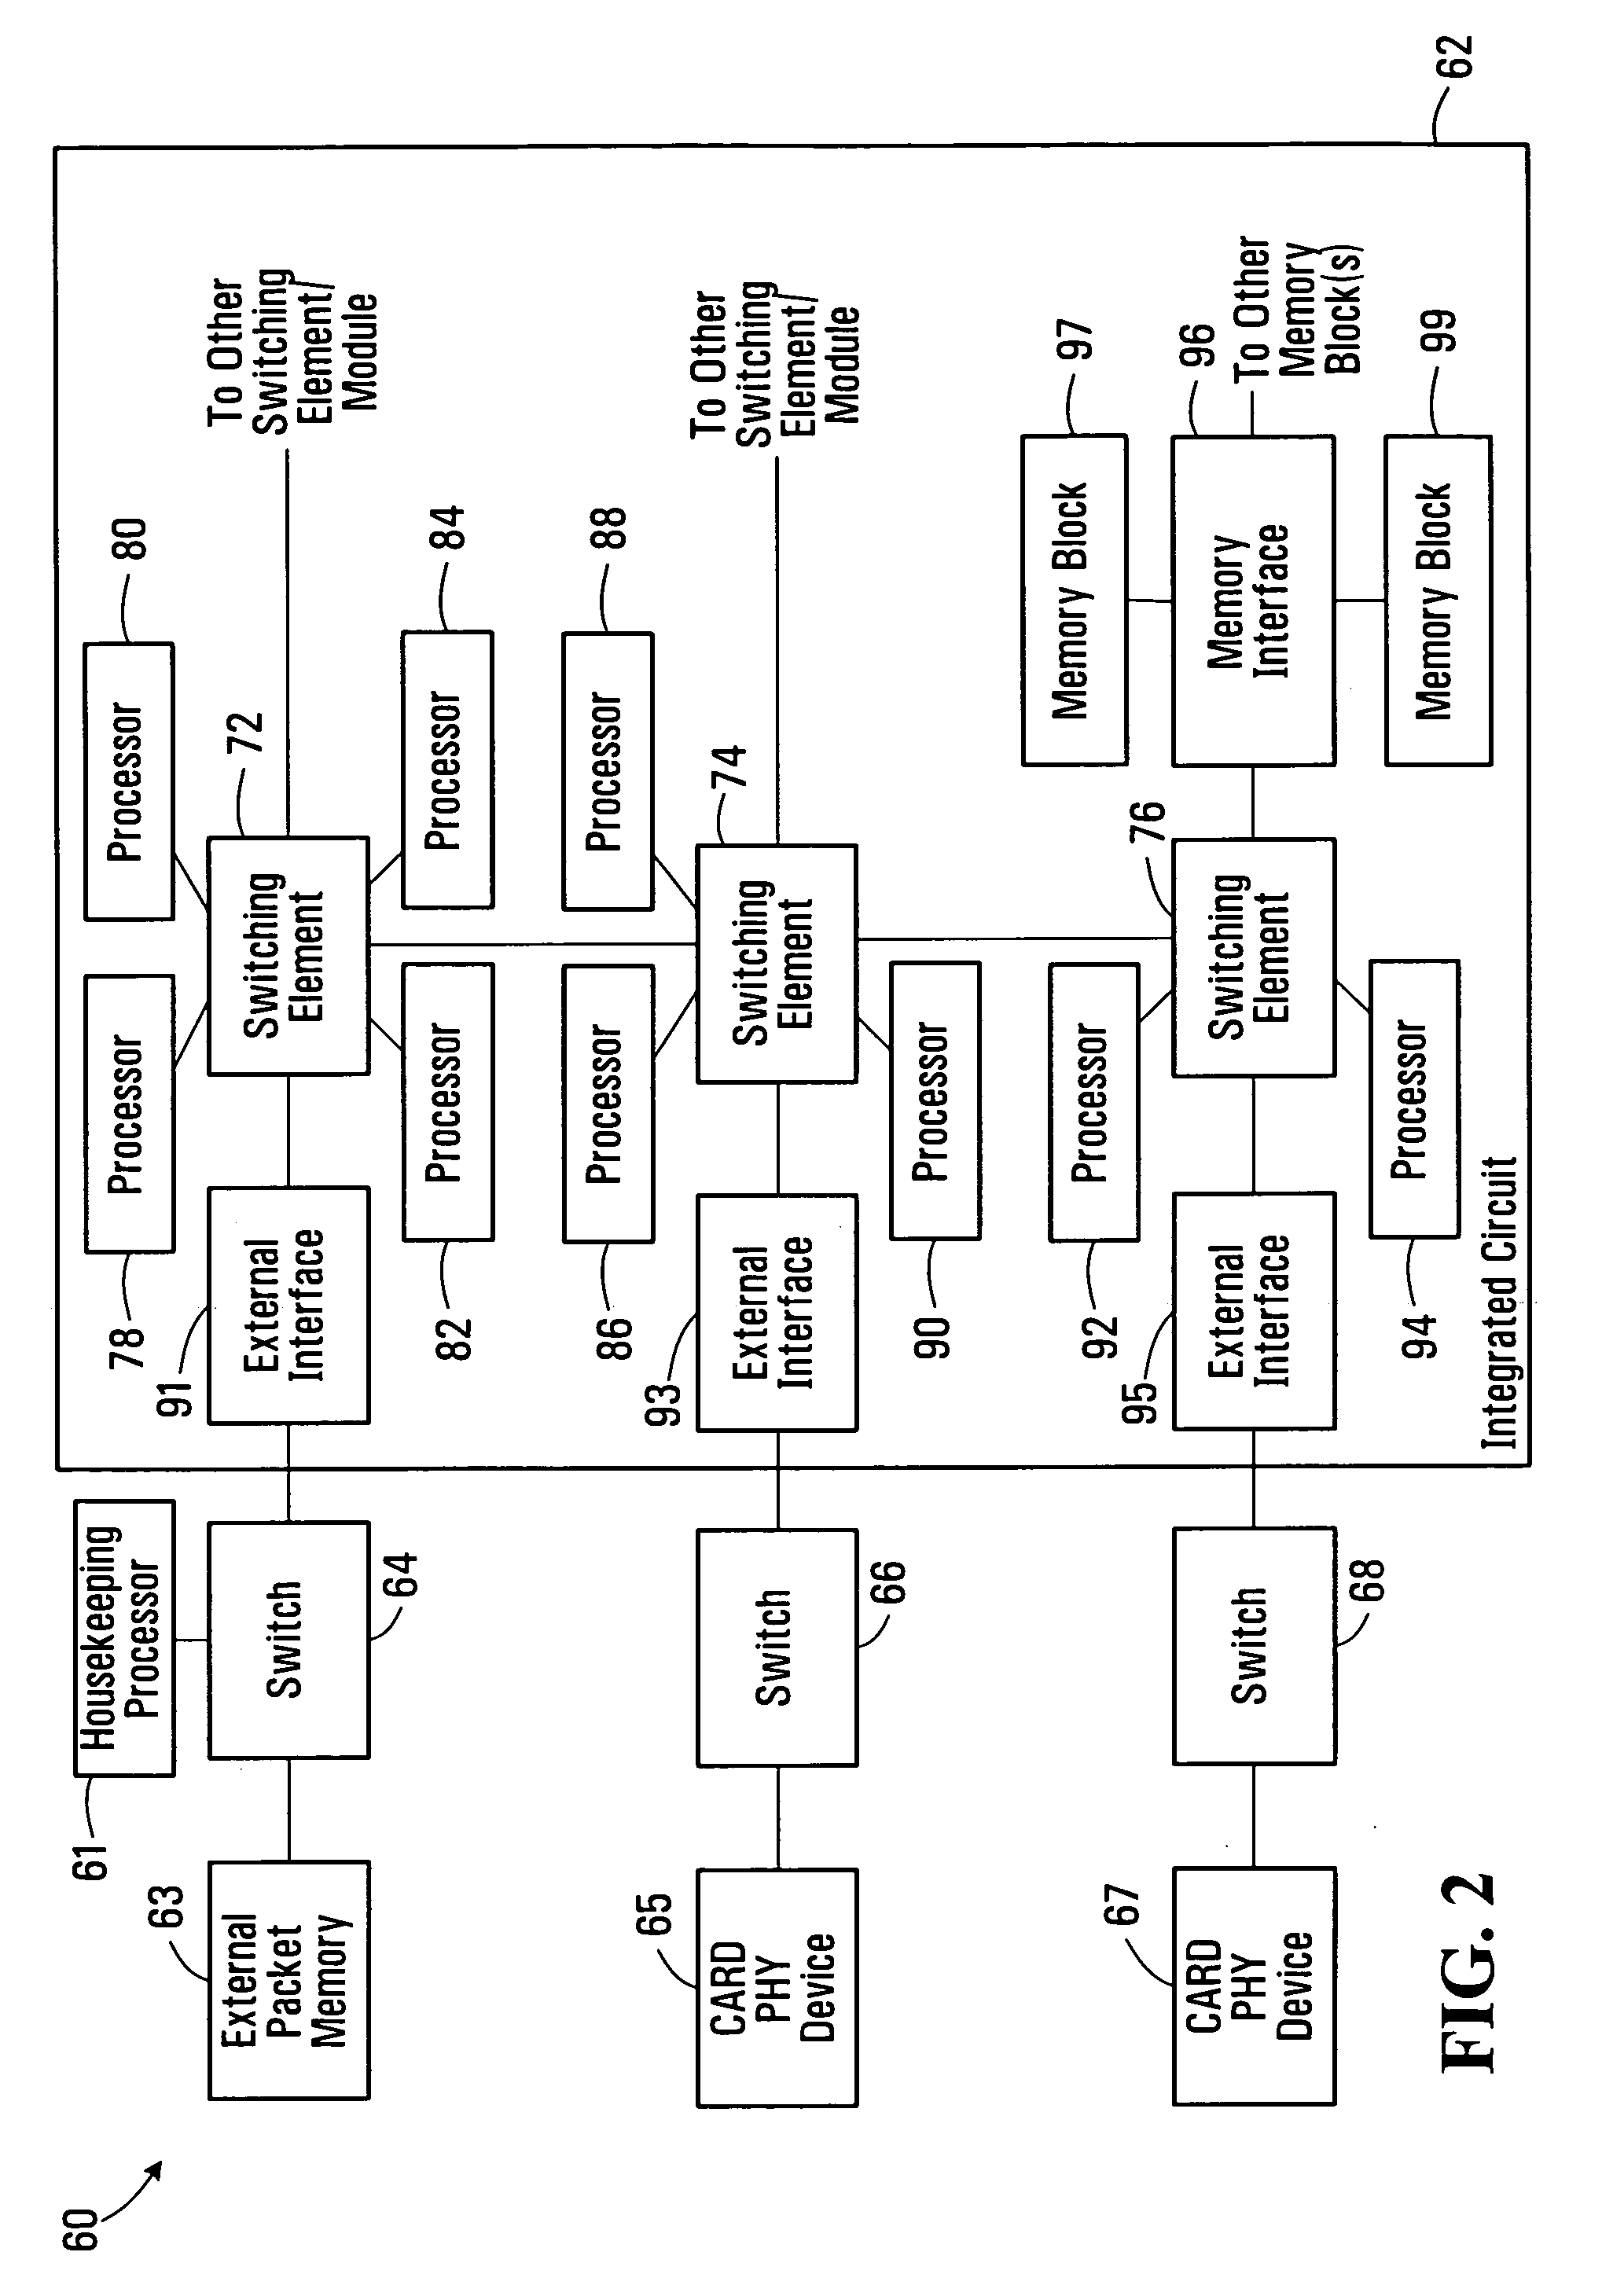 Switched integrated circuit connection architectures and techniques